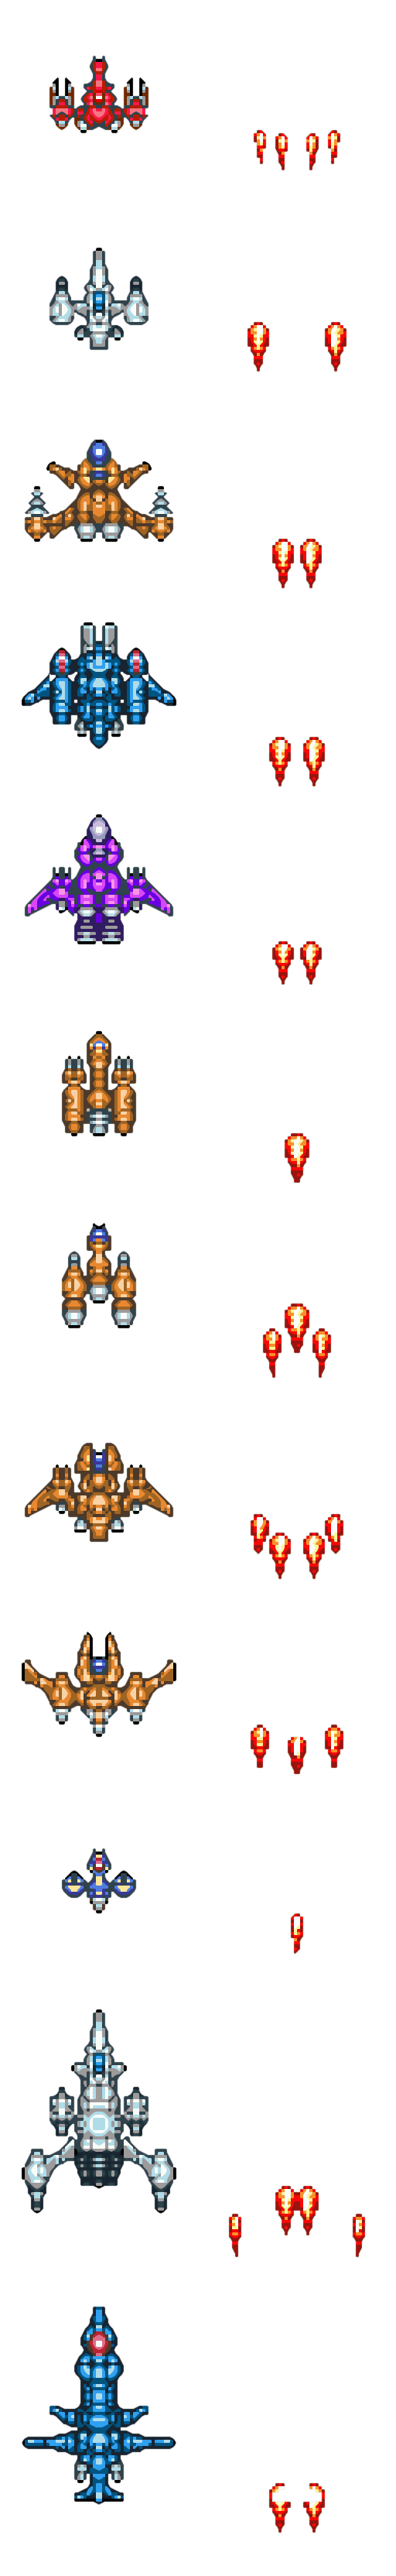 2D spaceship sprites with engines | OpenGameArt.org